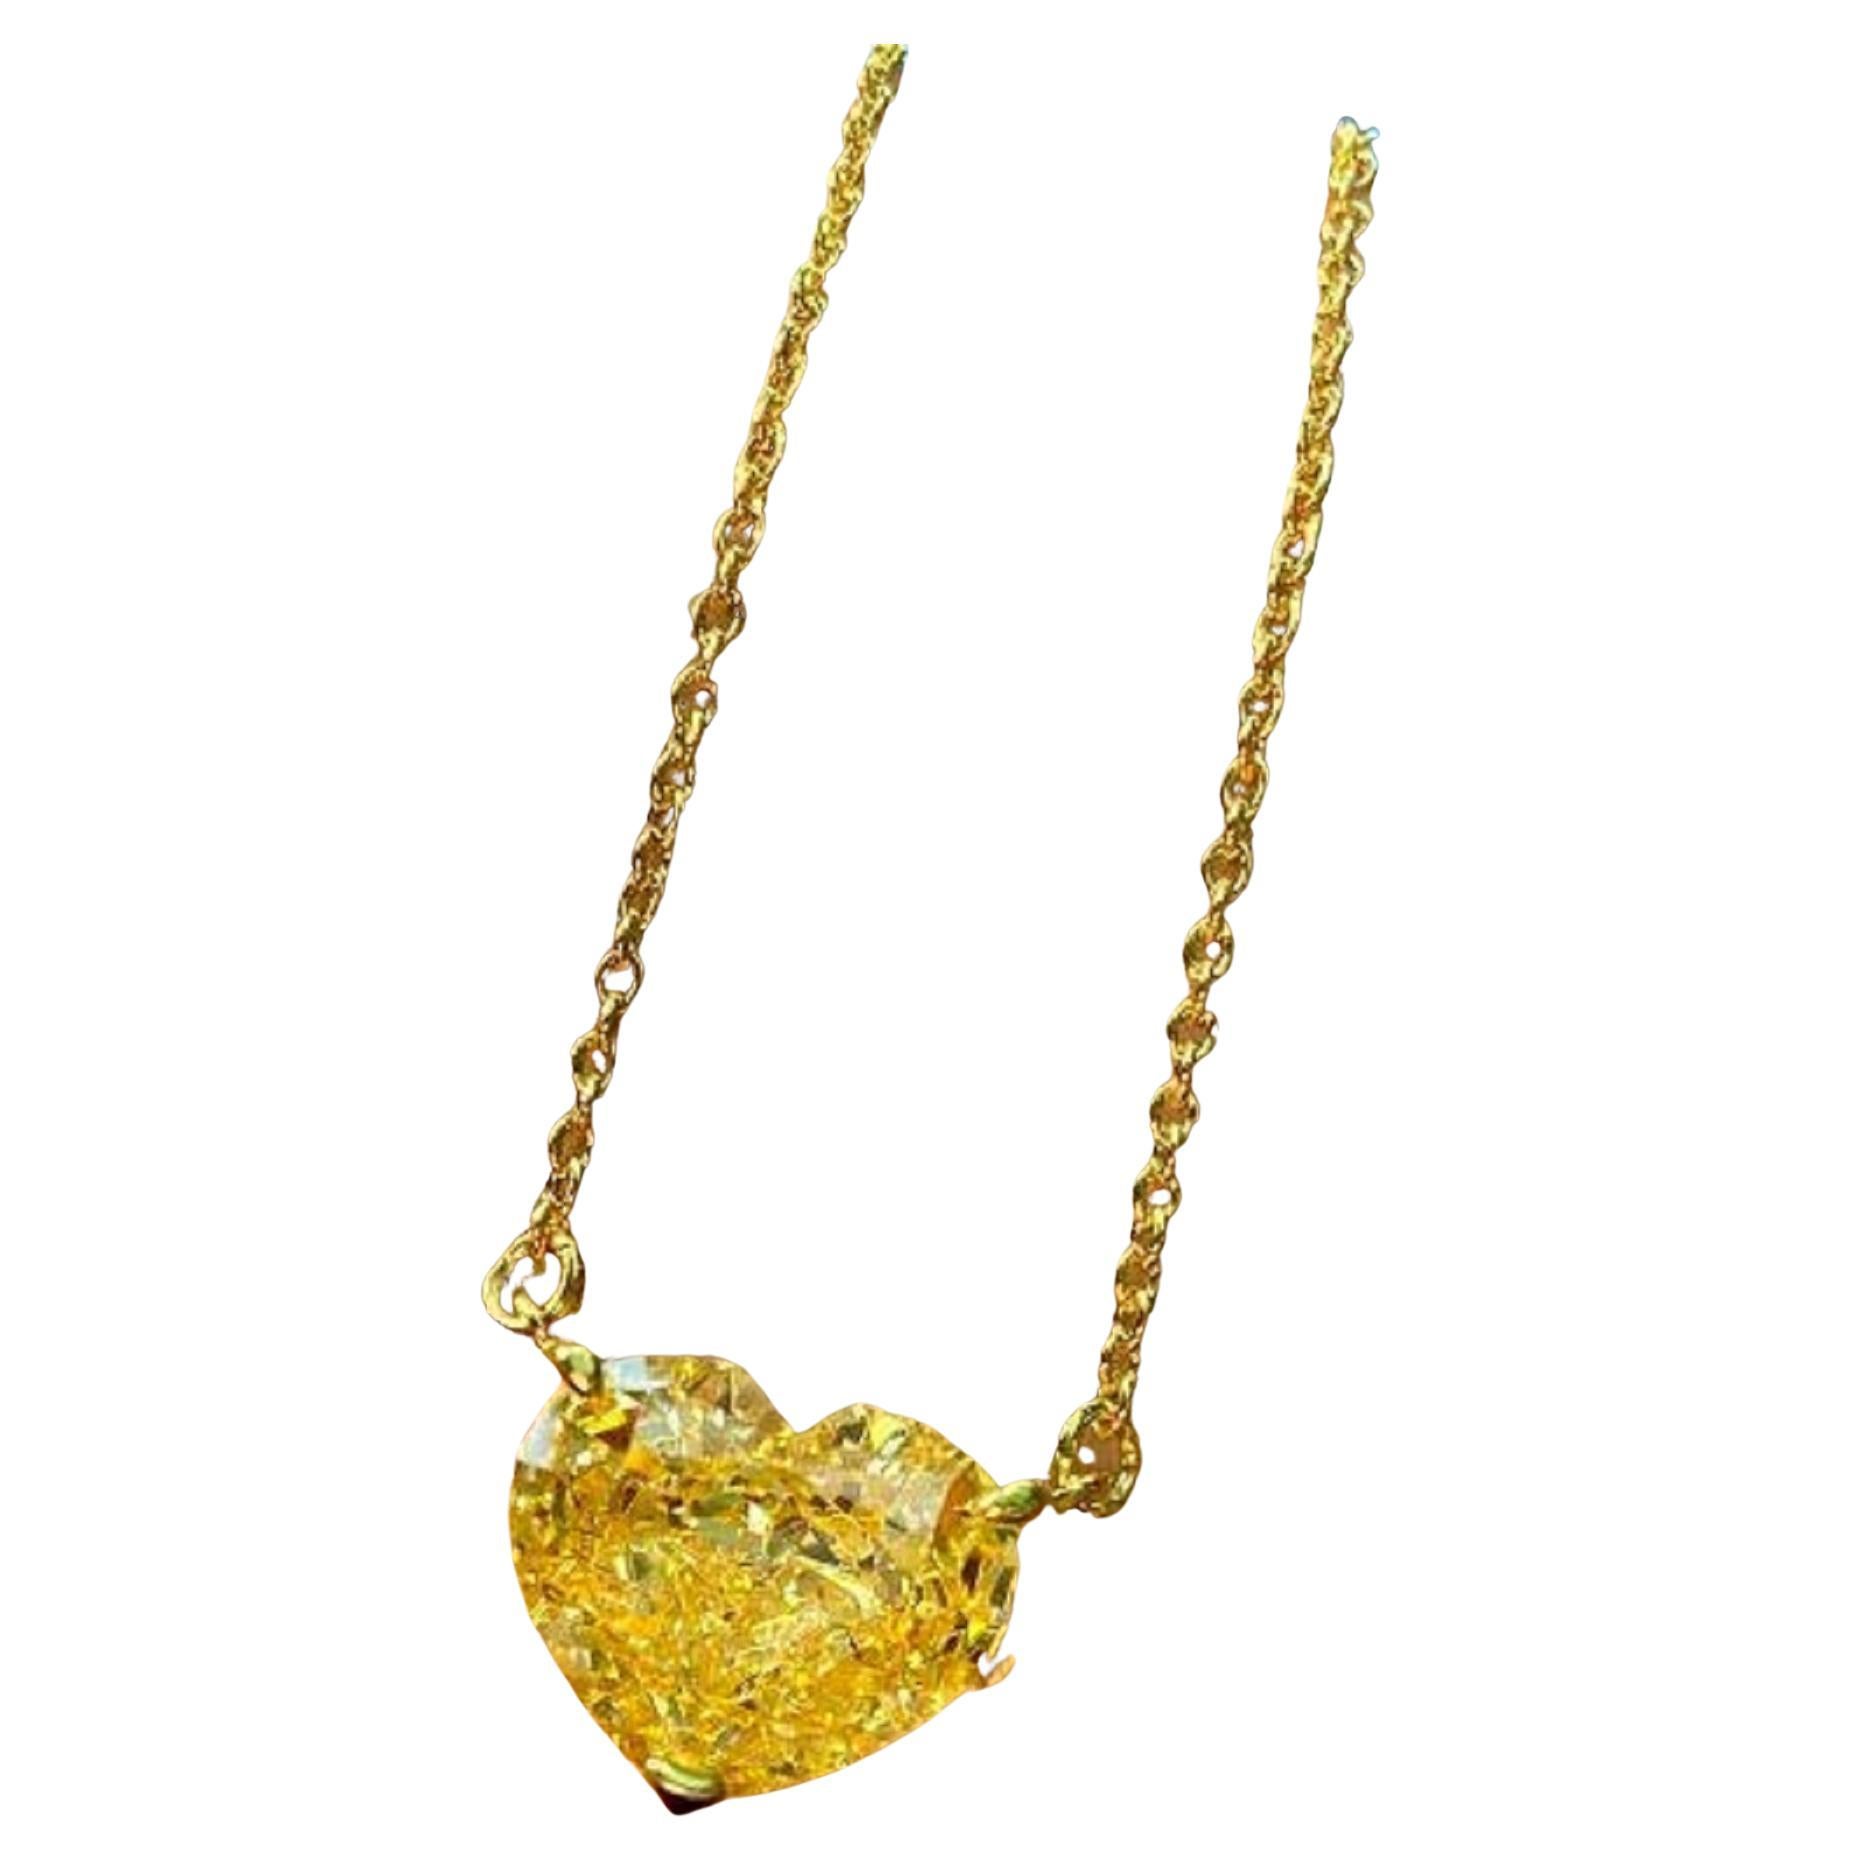 GIA Certified 3.13 Carat Fancy Intense Yellow Heart Shape Diamond Pendant Gold

This Beautiful Classic pendant necklace From Antinori di Sanpietro features a 3.13 carat Intense Yellow heart Cut Diamond with GIA certificate(See certificate picture